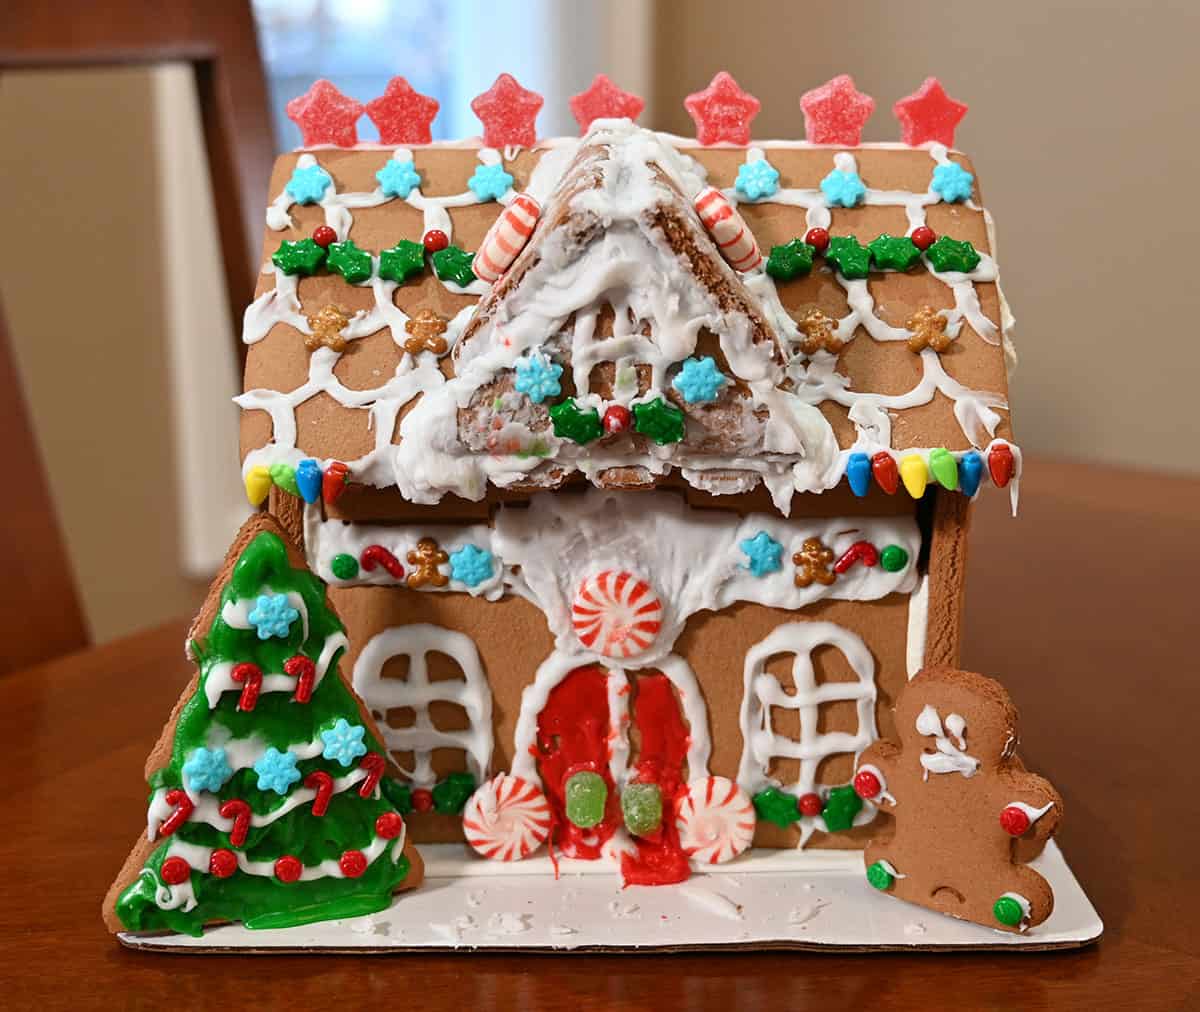 Image of a finished, fully decorated gingerbread mansion.